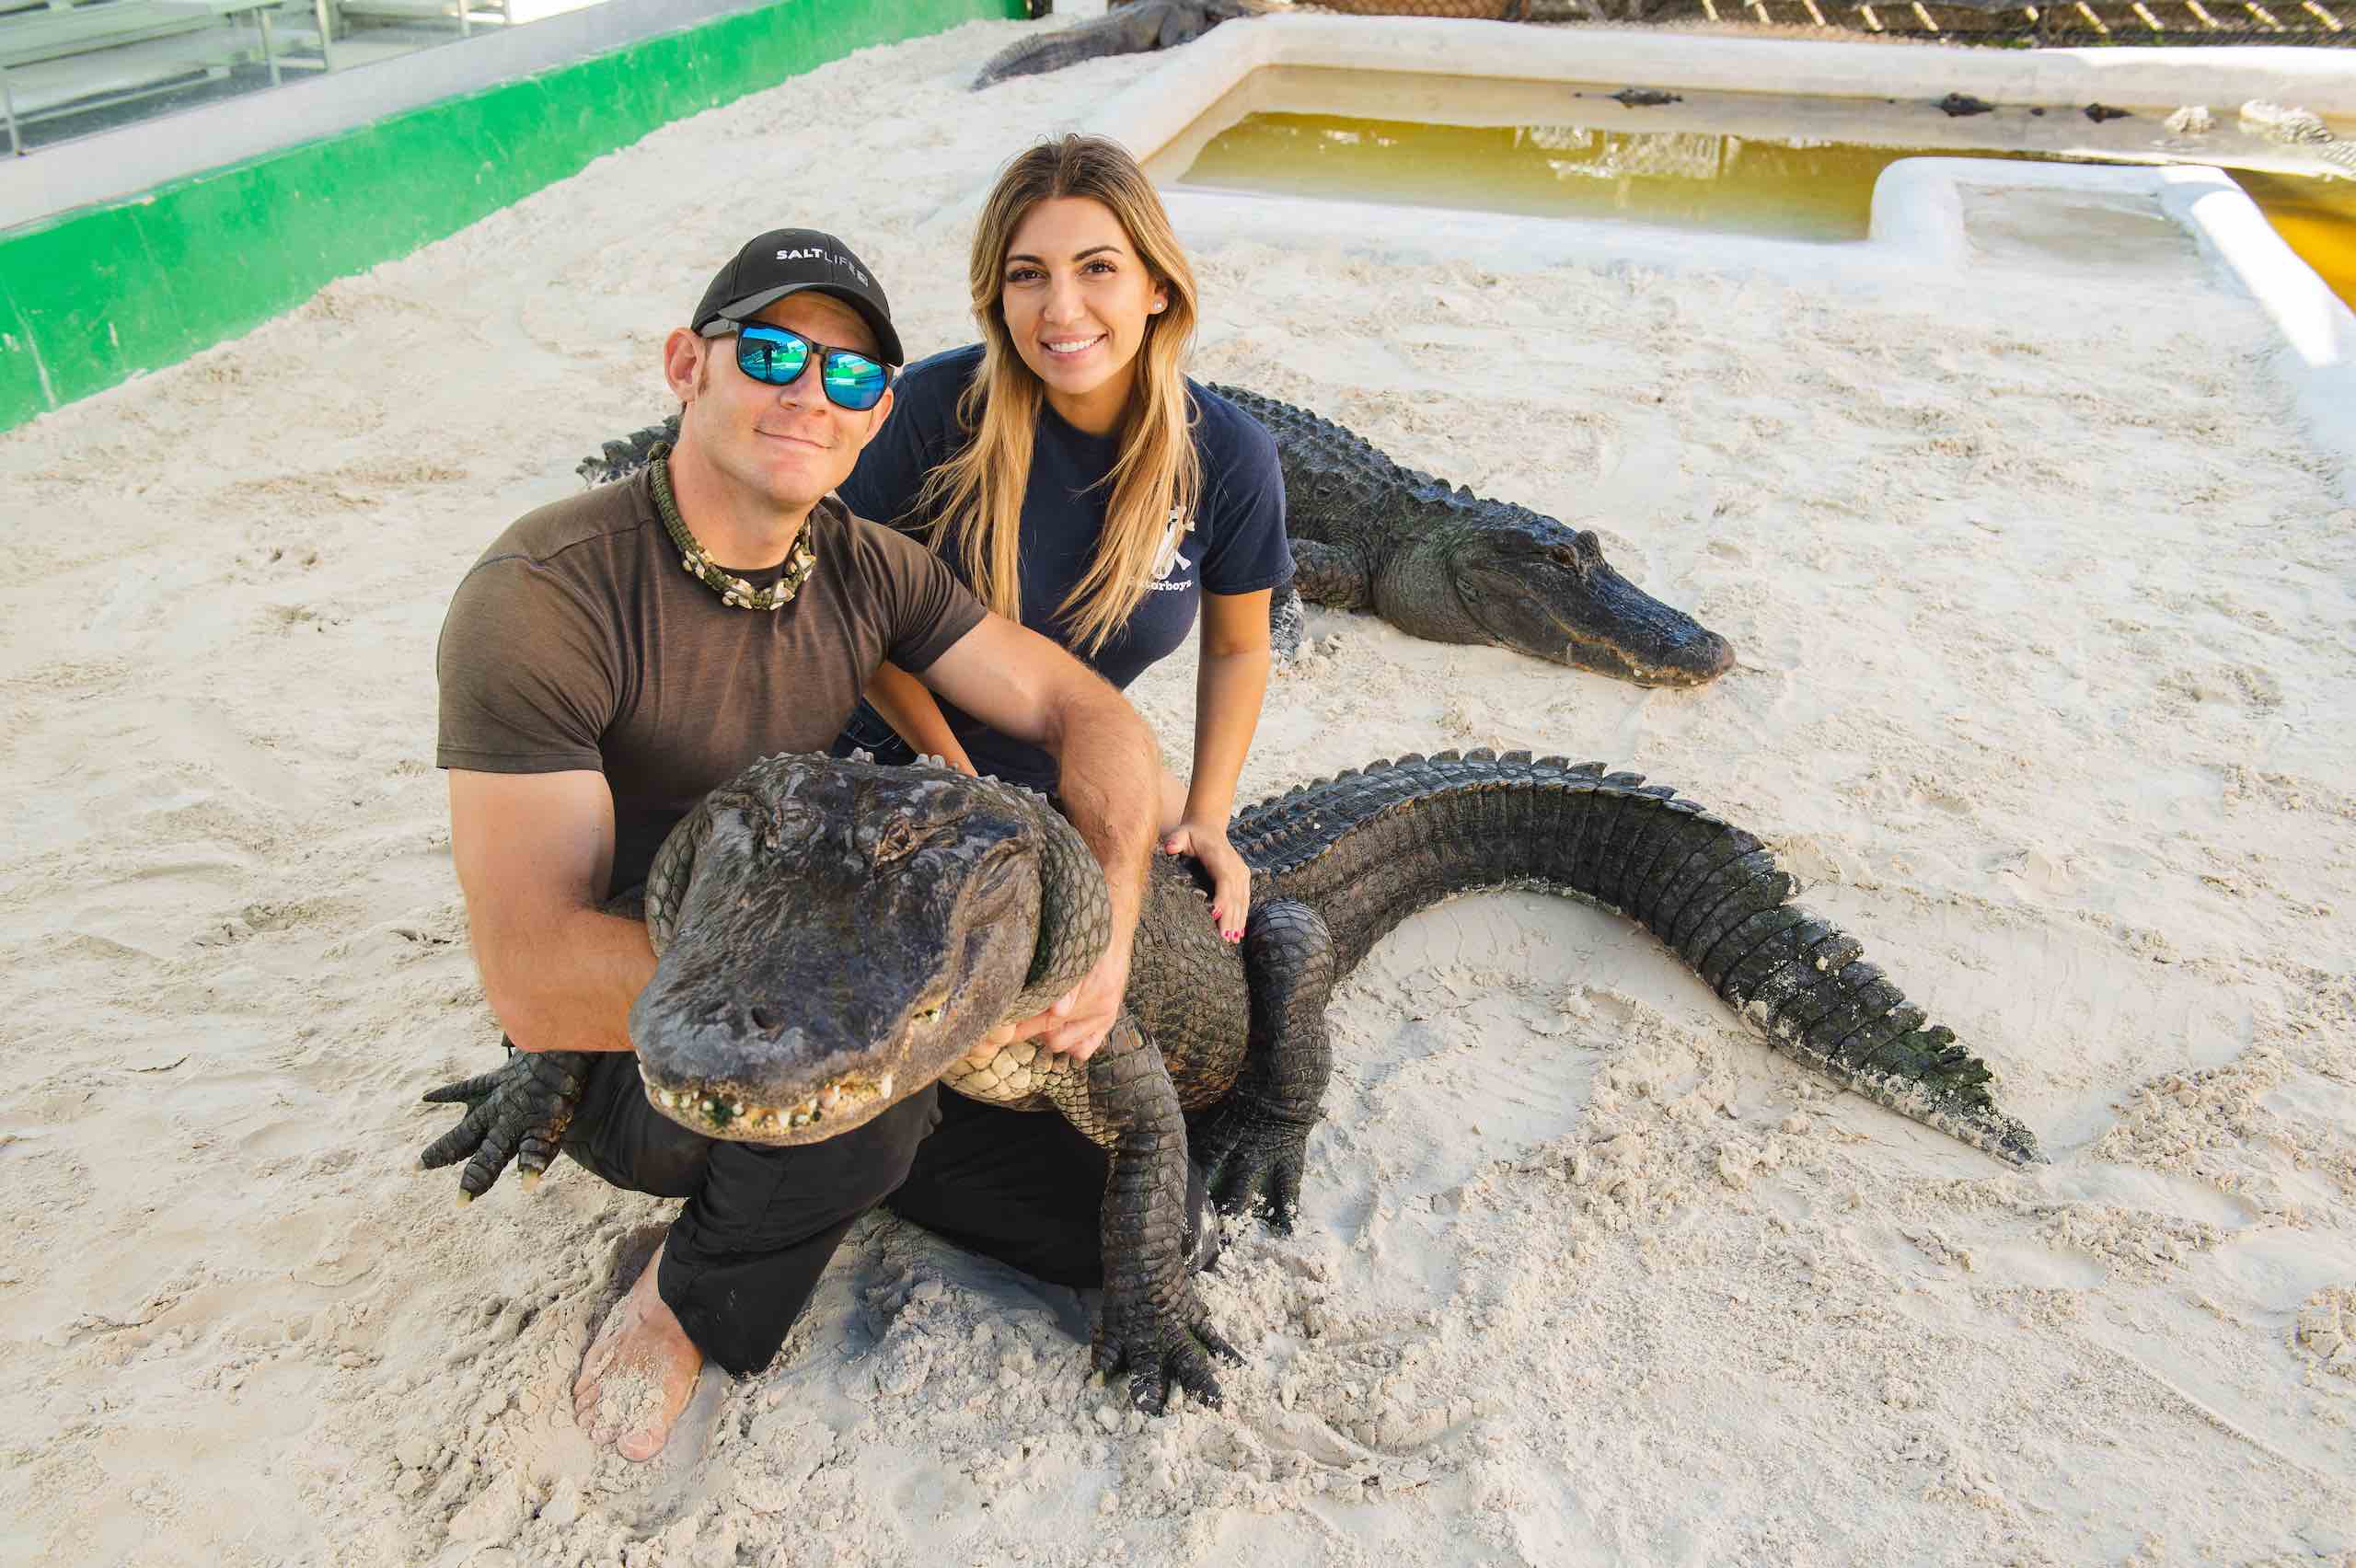 Everglades Holiday Park Muscular man and woman posing with alligators in a sand pit